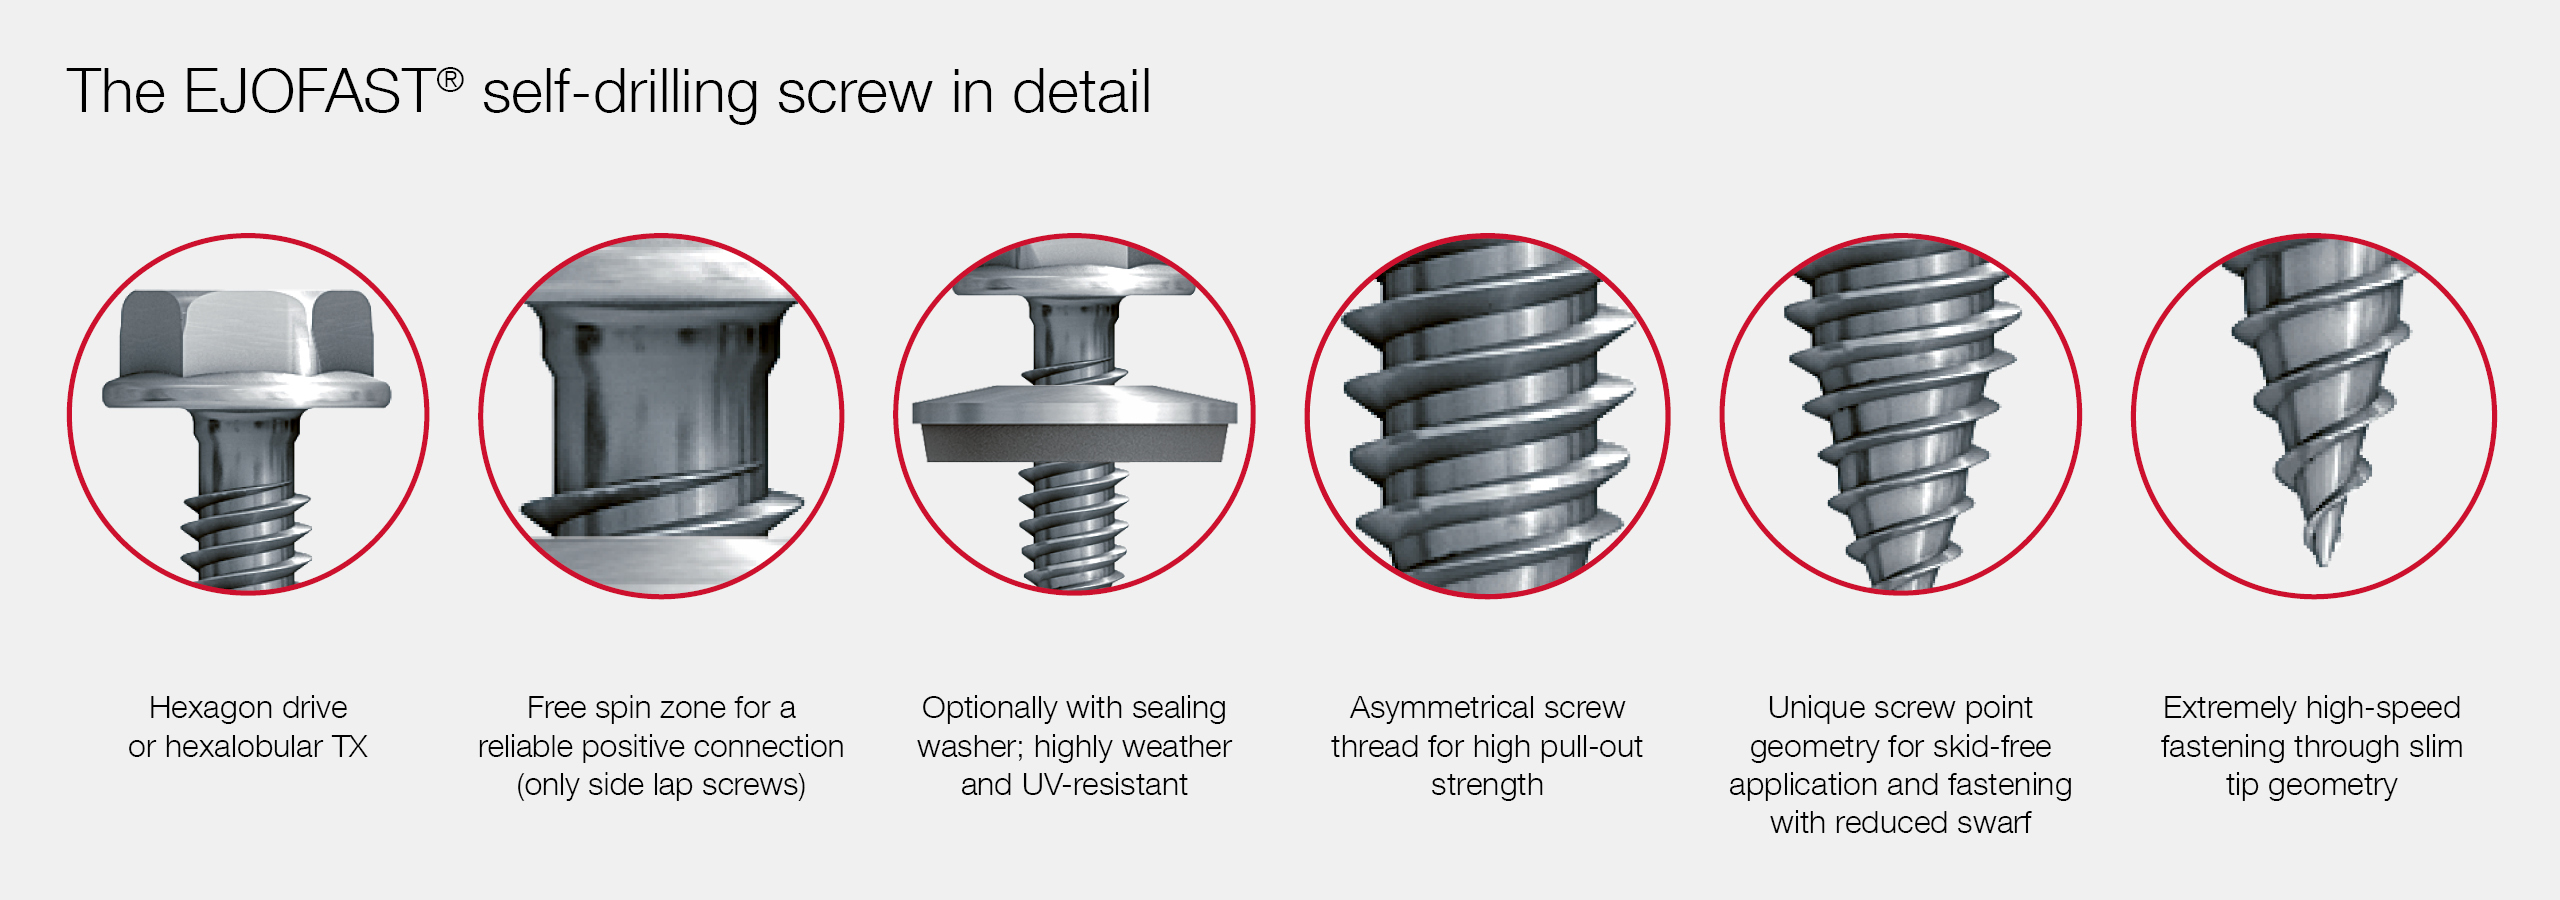 Features EJOFAST® self-drilling screw